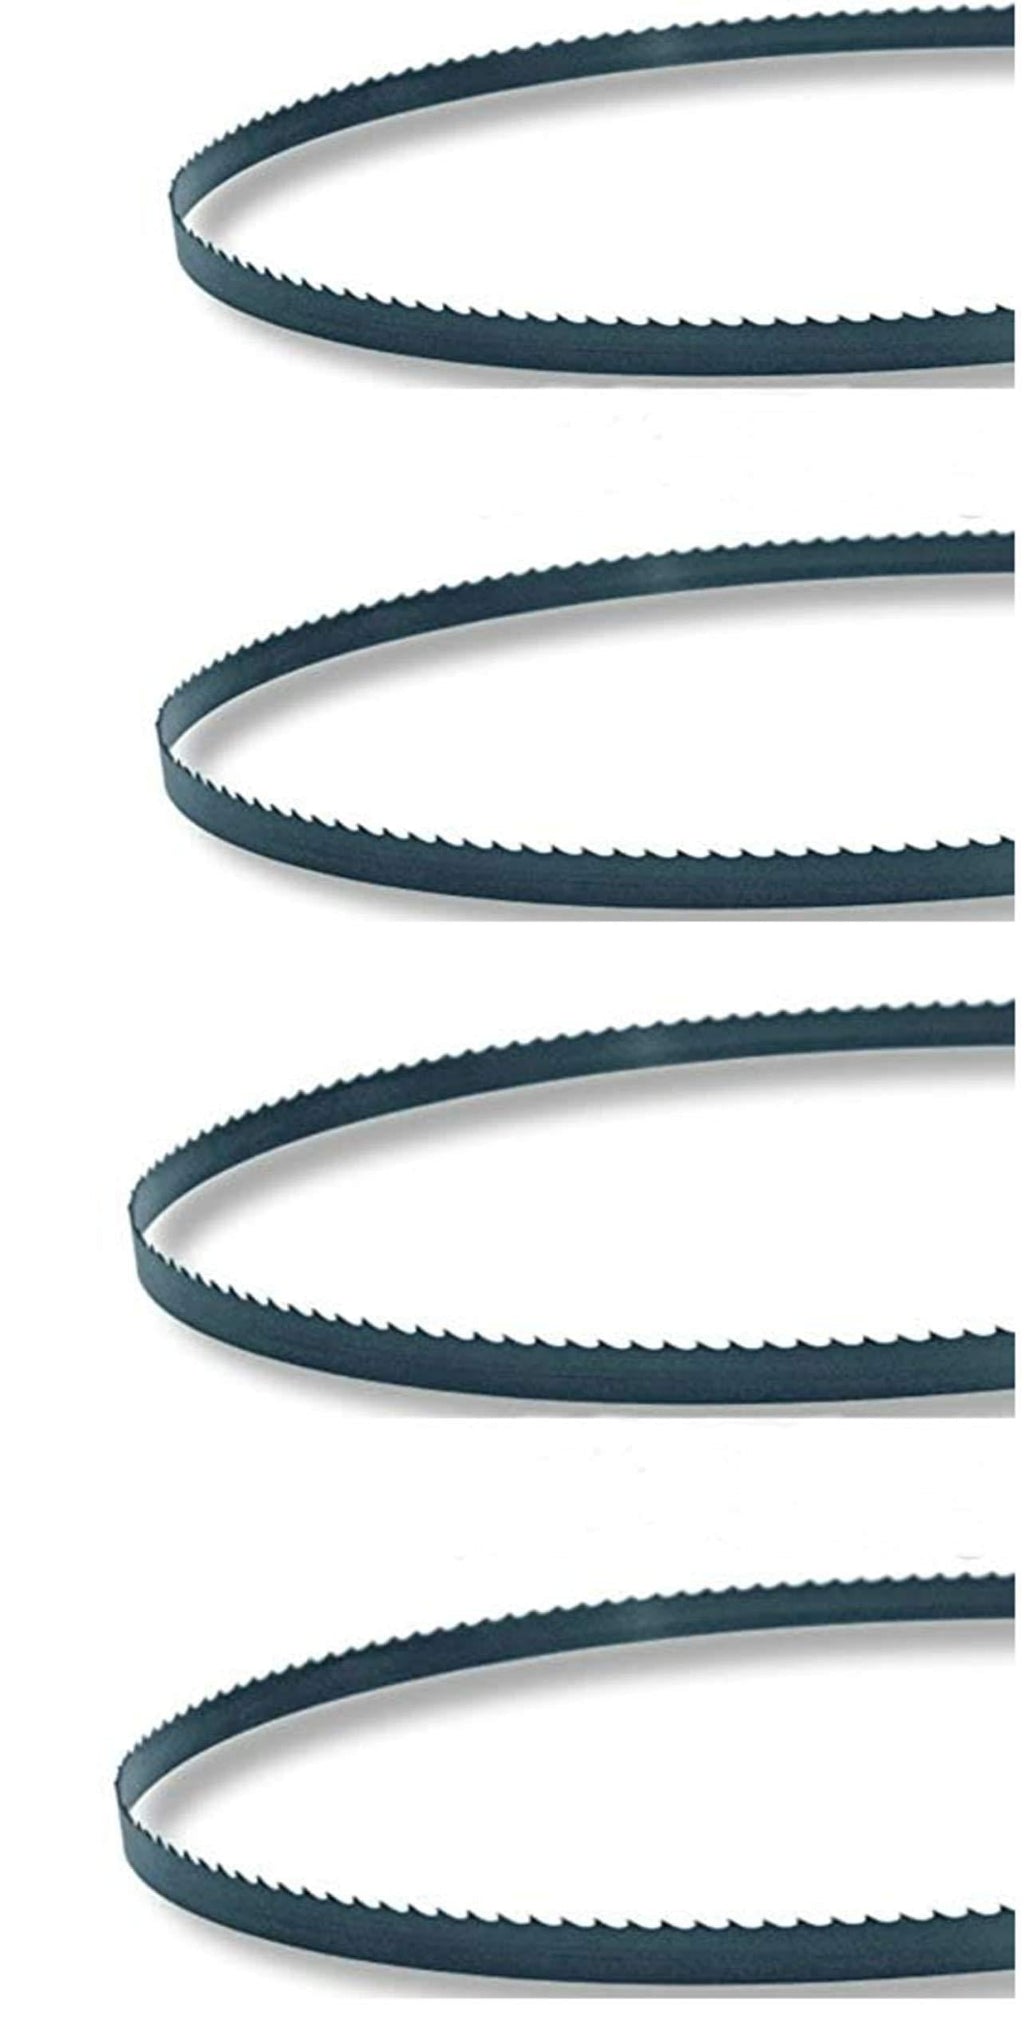 72 x 5/8 x 3TPI (2 Pack or 4 Pack) Boneless - Scalloped - Bandsaw Blades Meat Cutting 72 in. Length x 5/8 in Width x .022 Thickness x 3 TPI Band Saw Blade (4 Pack) - LeoForward Australia